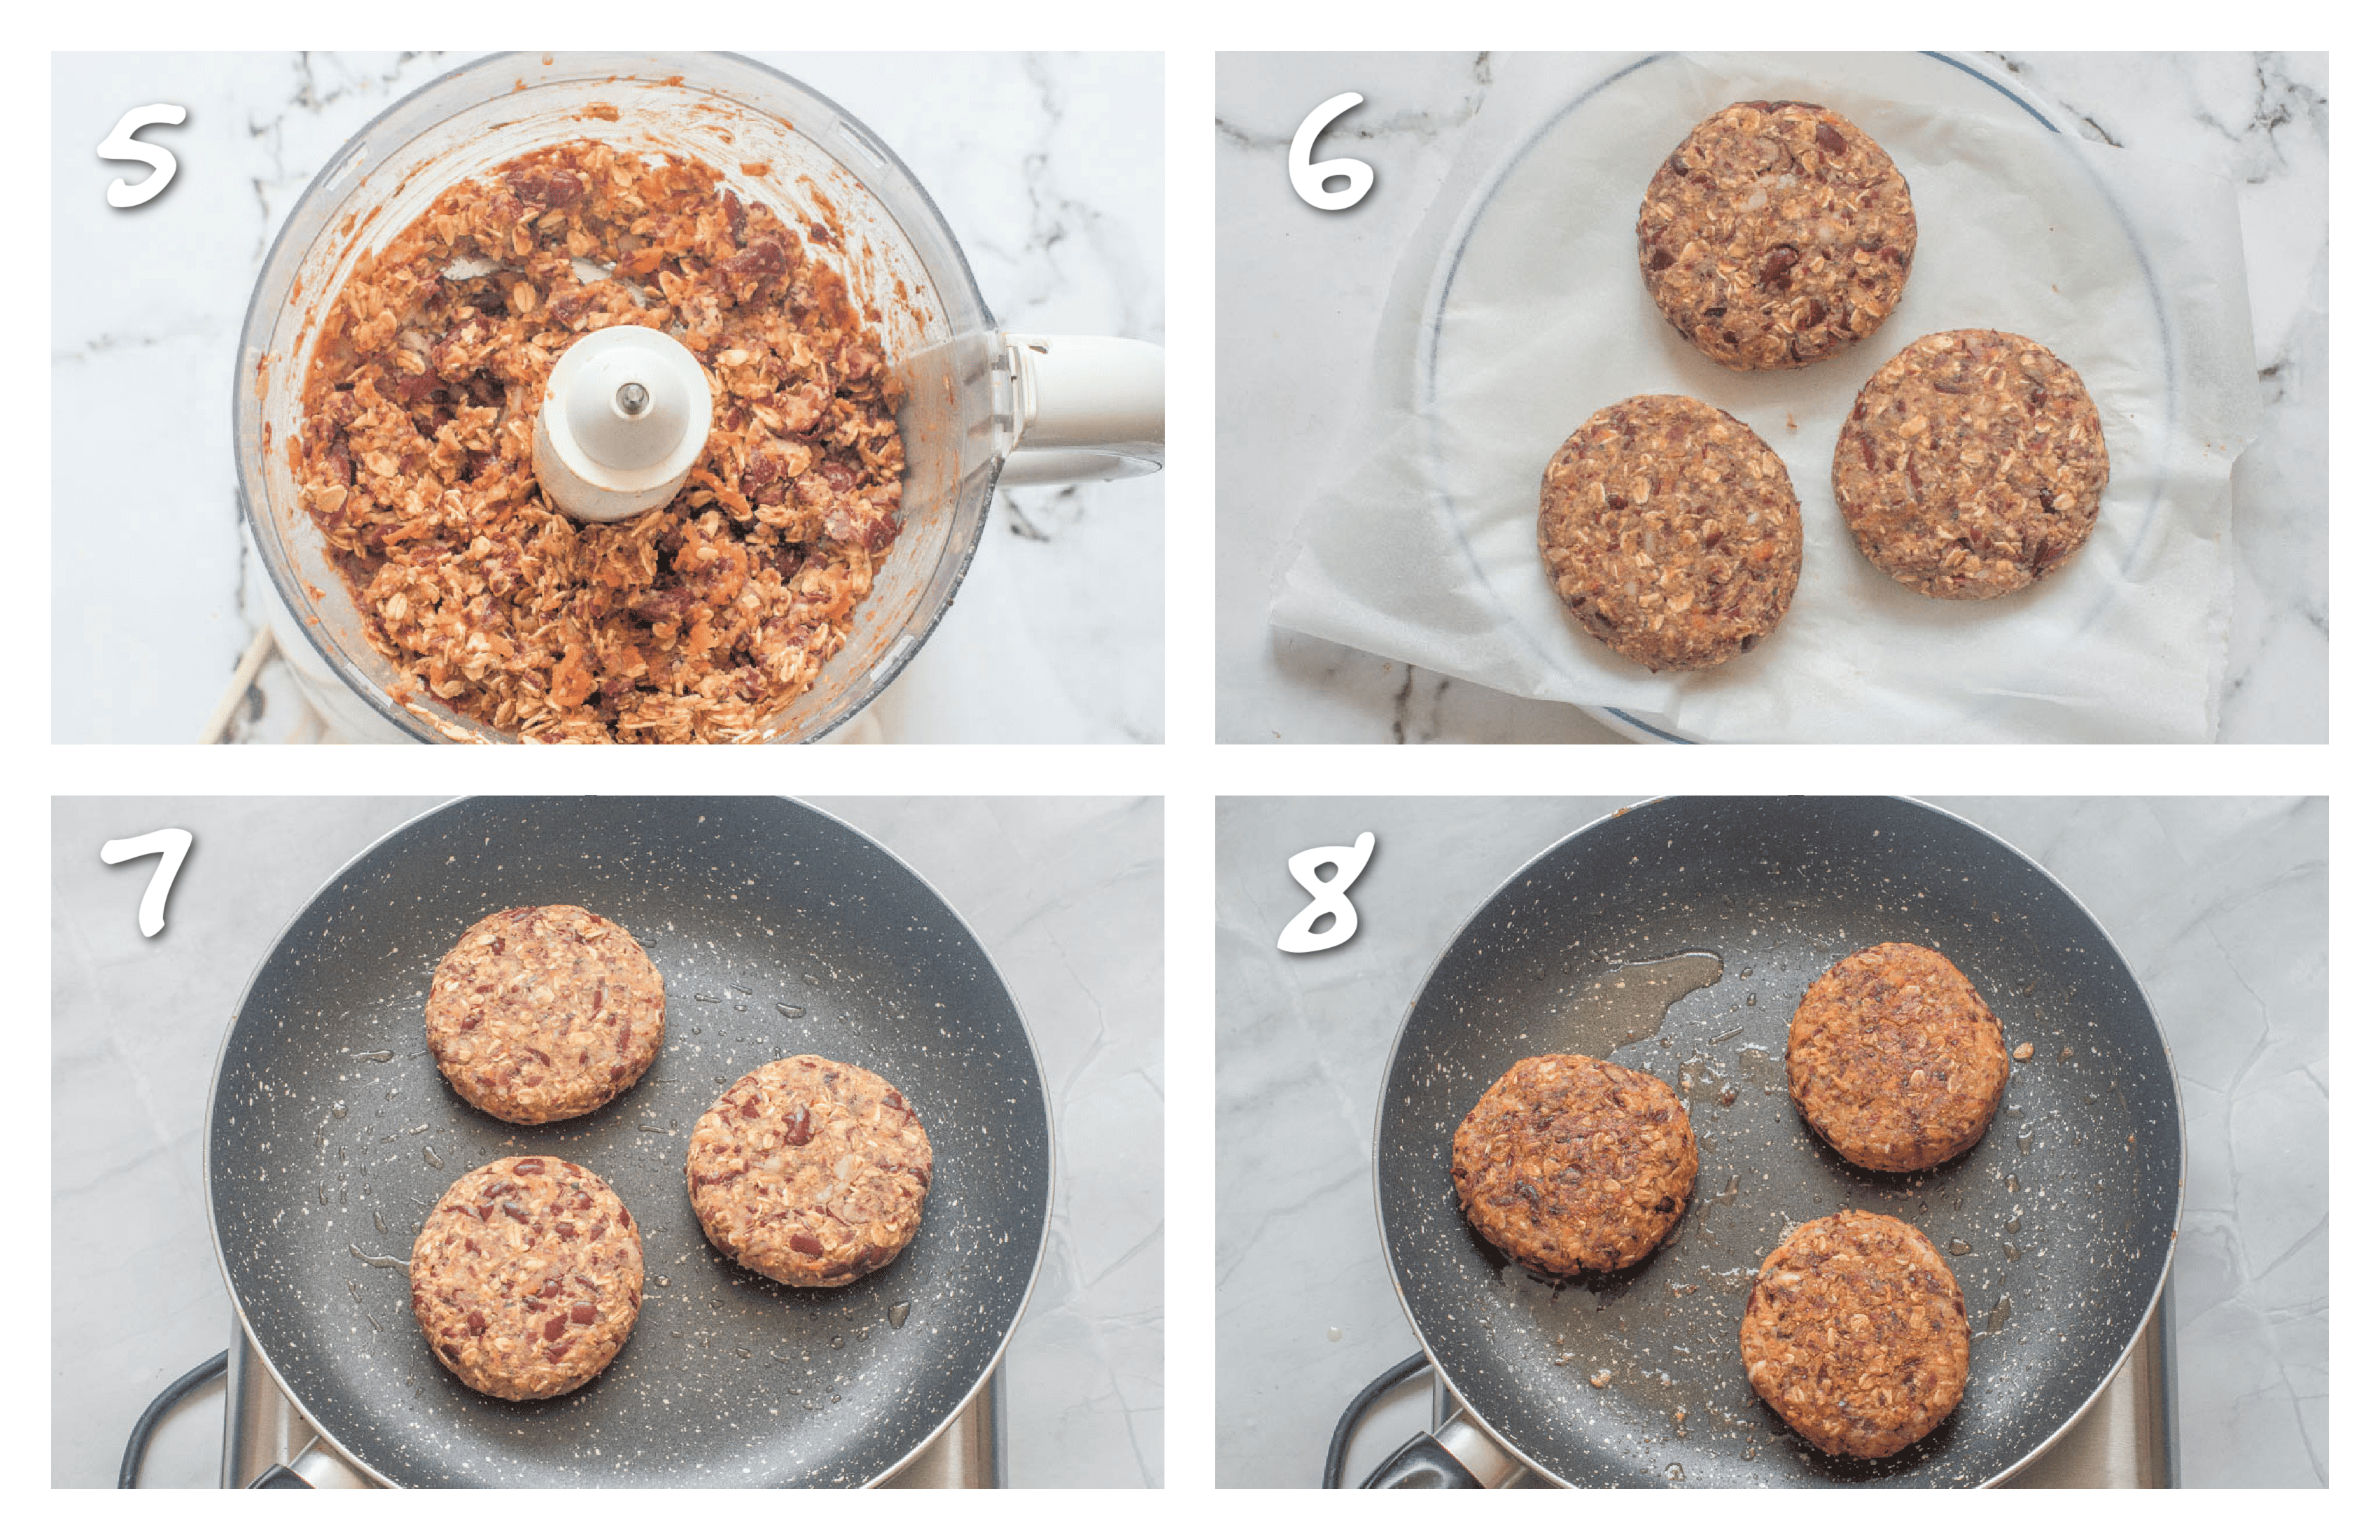 Steps 5-8 forming the burgers and cooking them